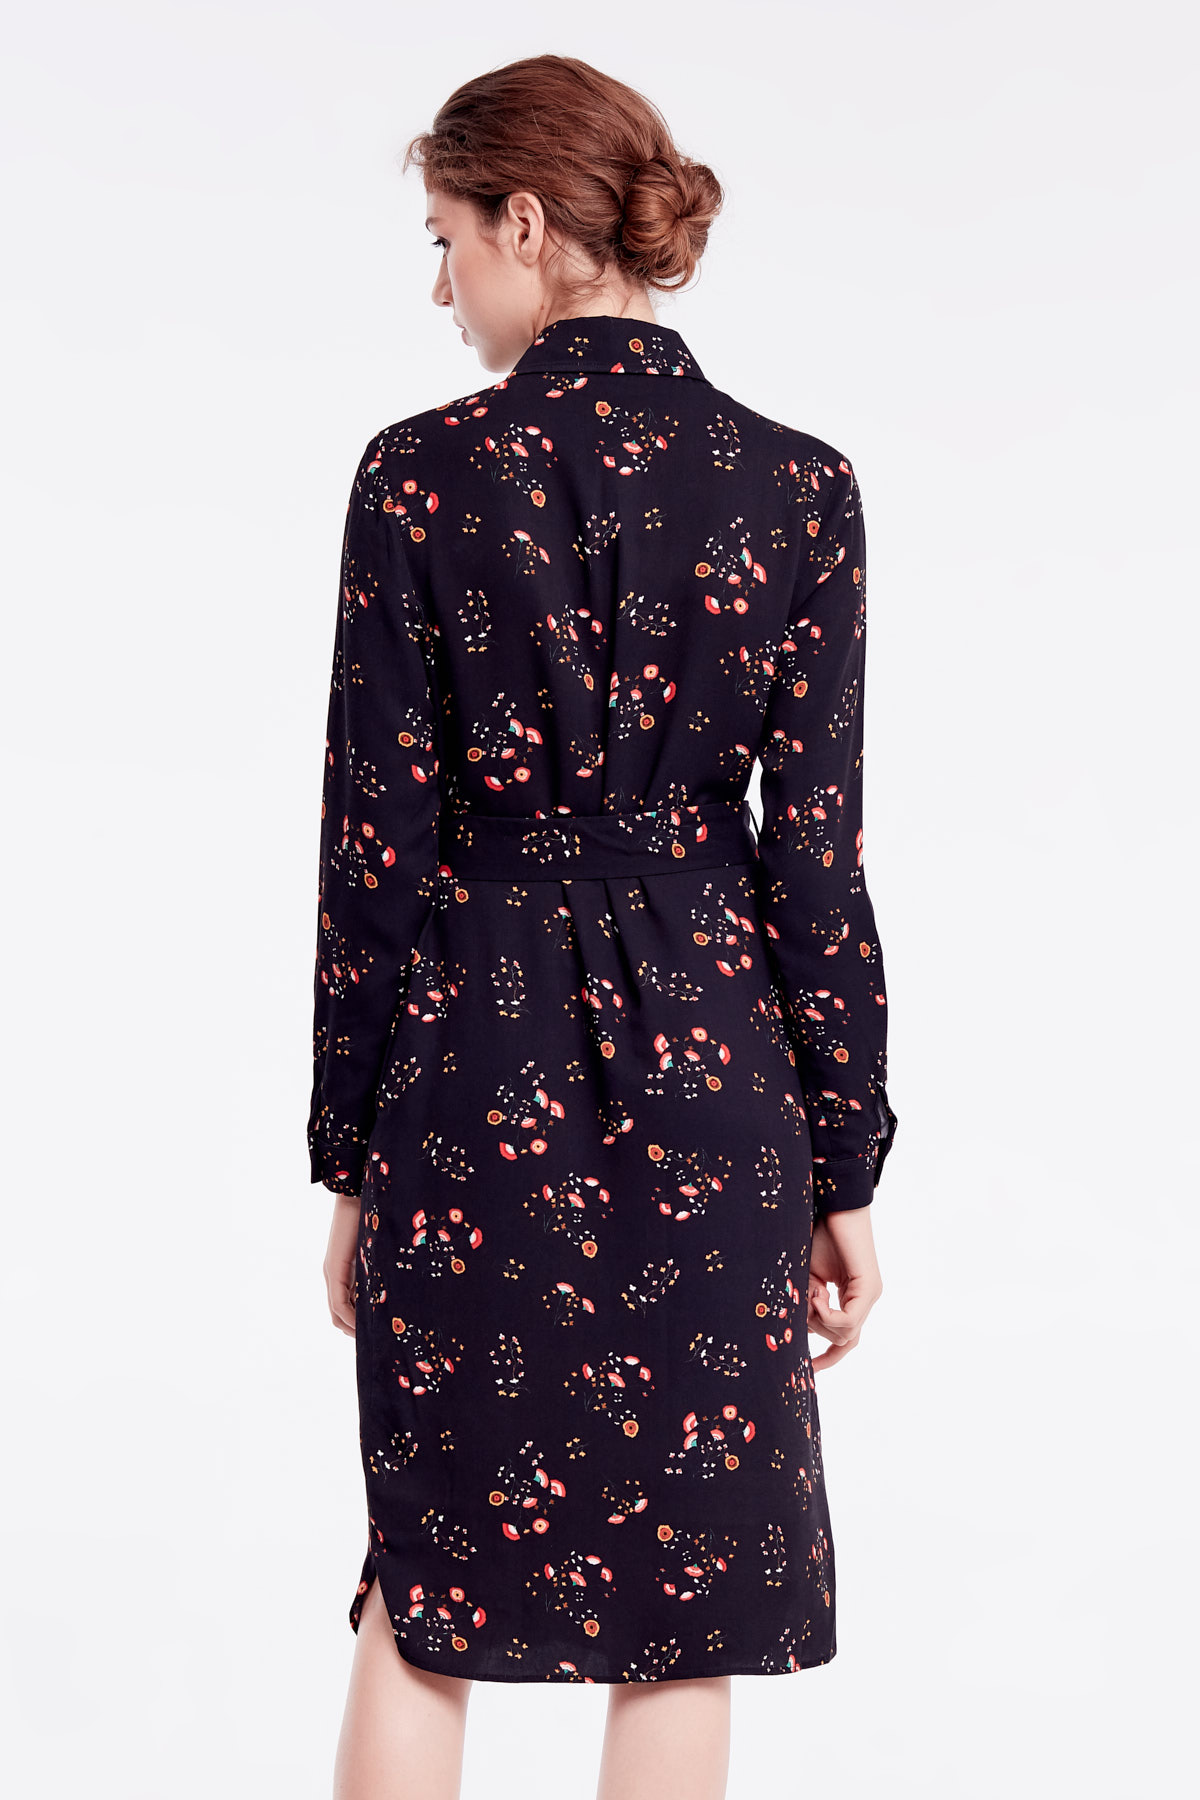 Black floral dress with a concealed placket, photo 5